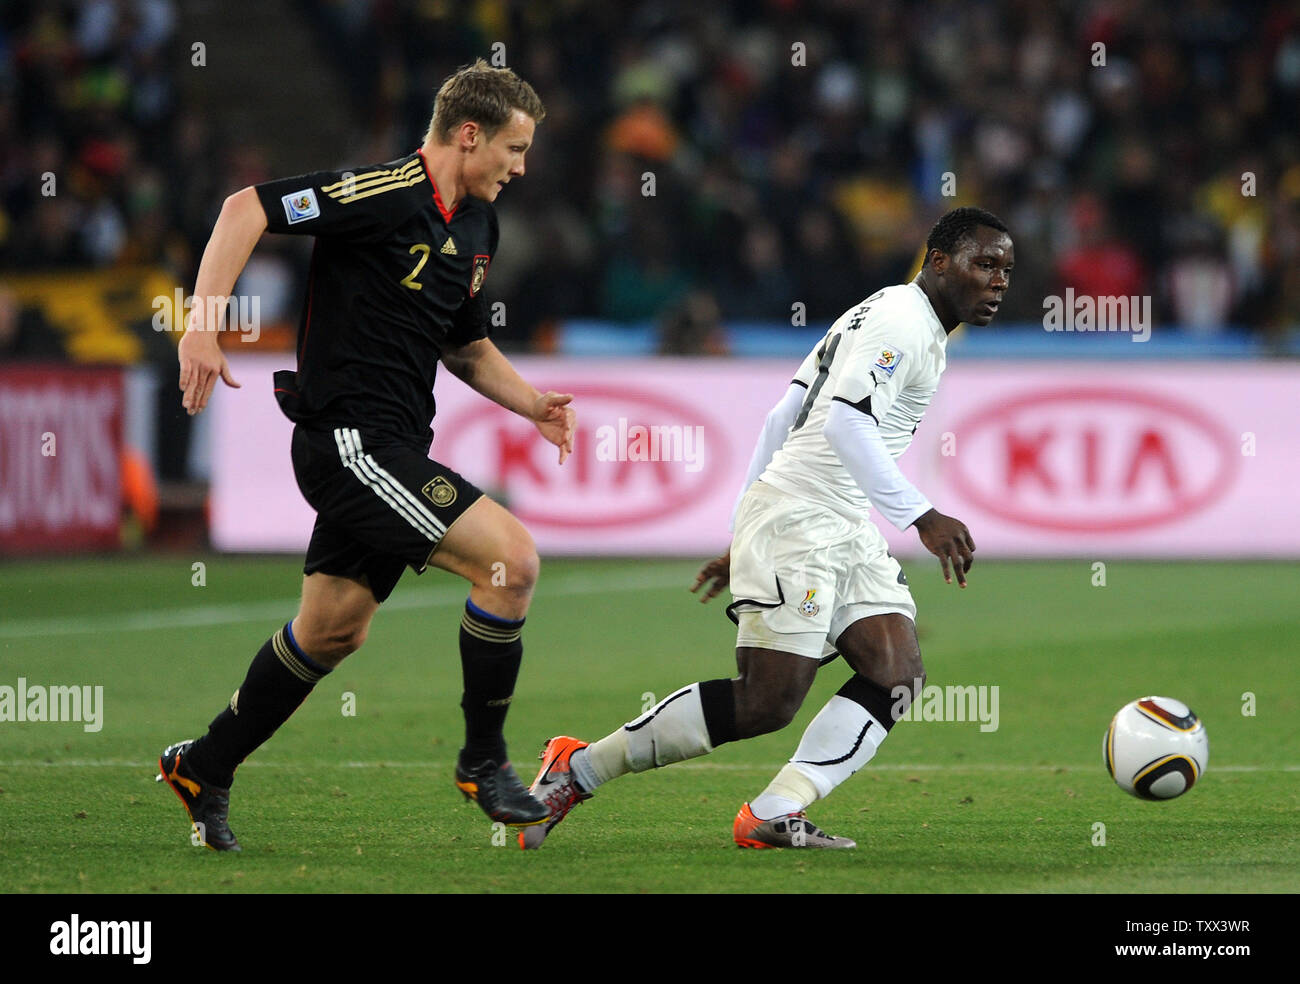 Kwadwo Asamoah of Ghana and Marcell Jansen of Germany go after the ball during the Group D match at Soccer City Stadium in Johannesburg, South Africa on June 23, 2010. UPI/Chris Brunskill Stock Photo